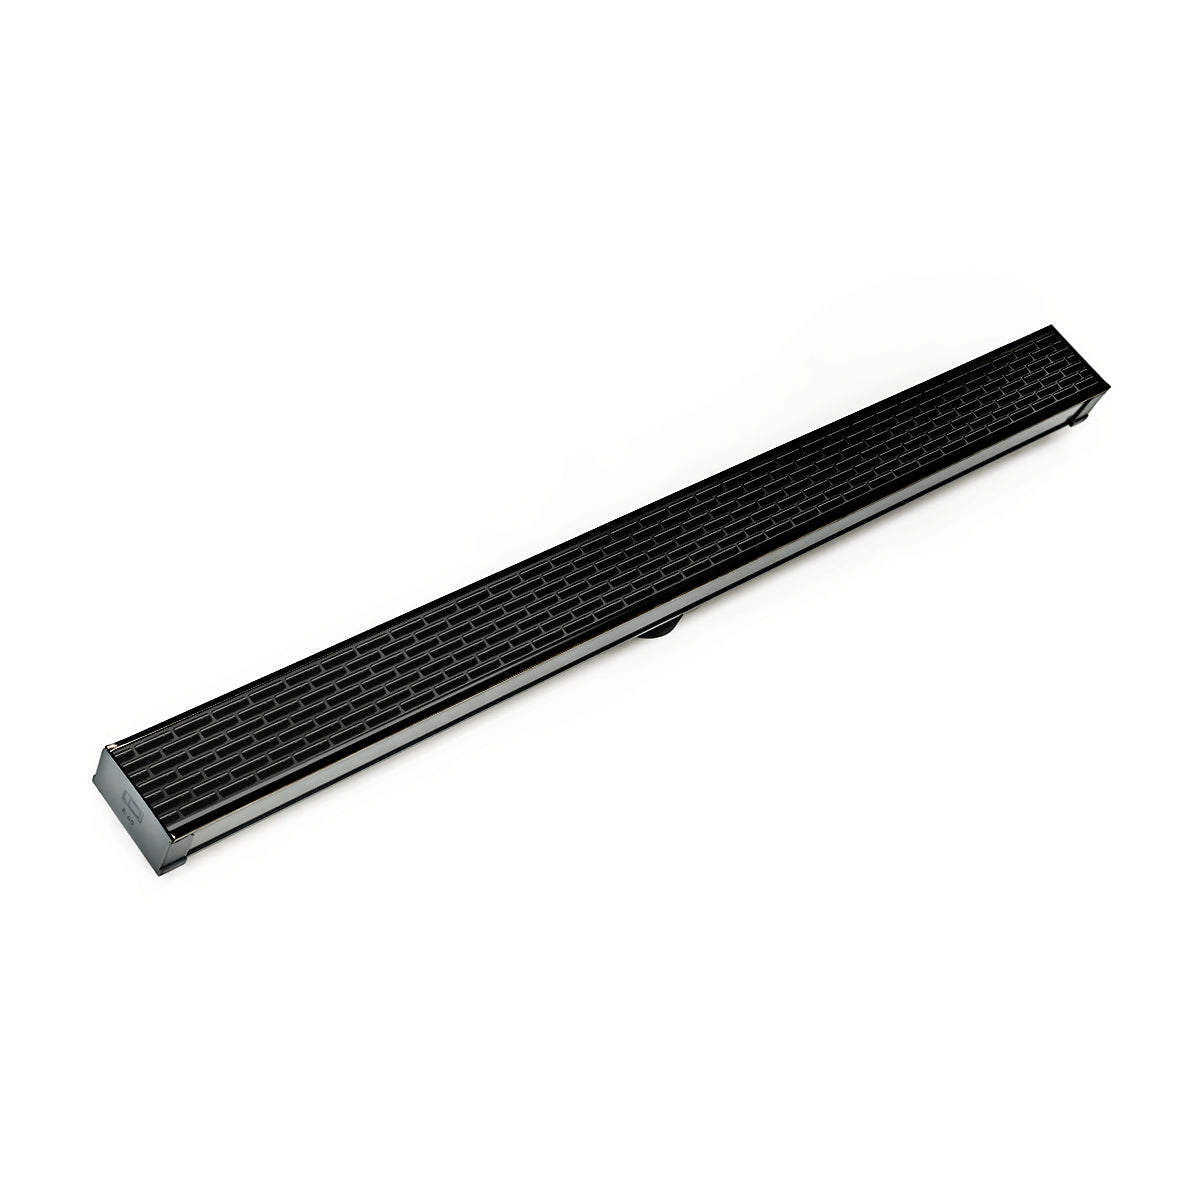 Infinity Drain 60" S-PVC Series Low Profile Site Sizable Linear Drain Kit with 2 1/2" Perforated Offset Slot Grate